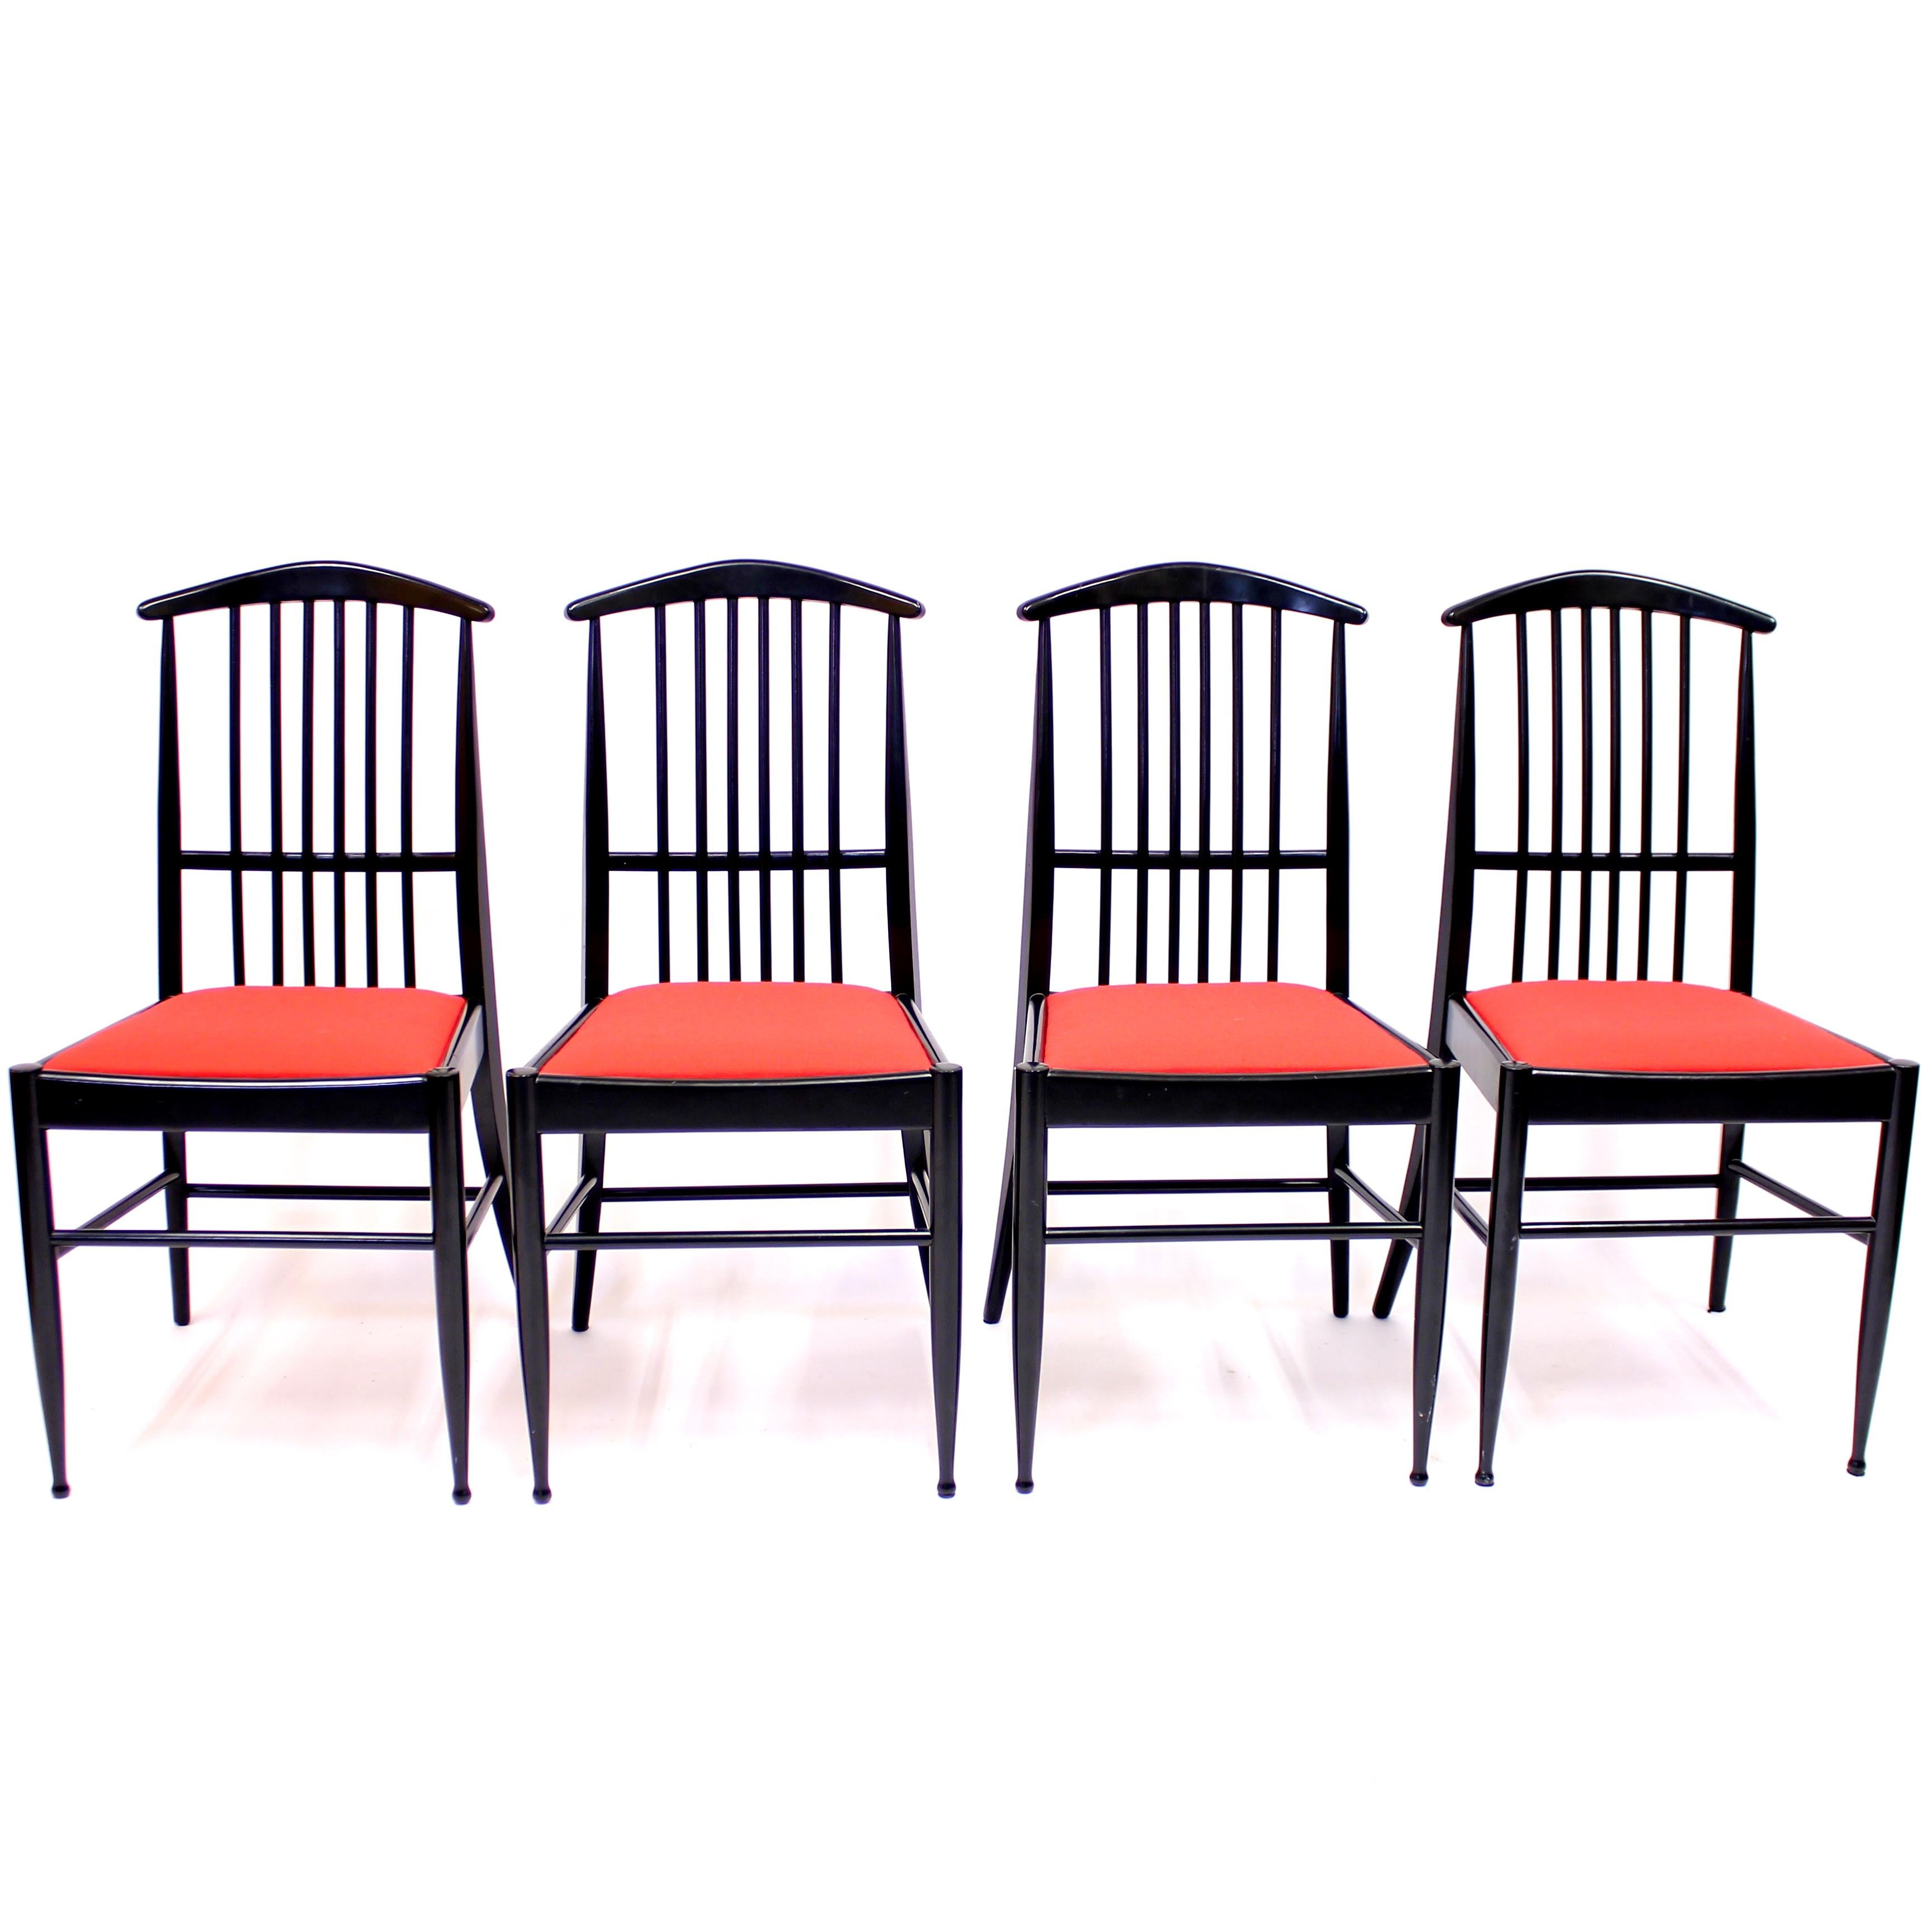 Set of 4 black lacquered dining chairs designed by Swedish designer Kerstin Hörlin-Holmquist who mainly worked for Swedish furniture manufacturer NK but the Charlotte dining range (the model is sometimes also called Charlotta) was designed for